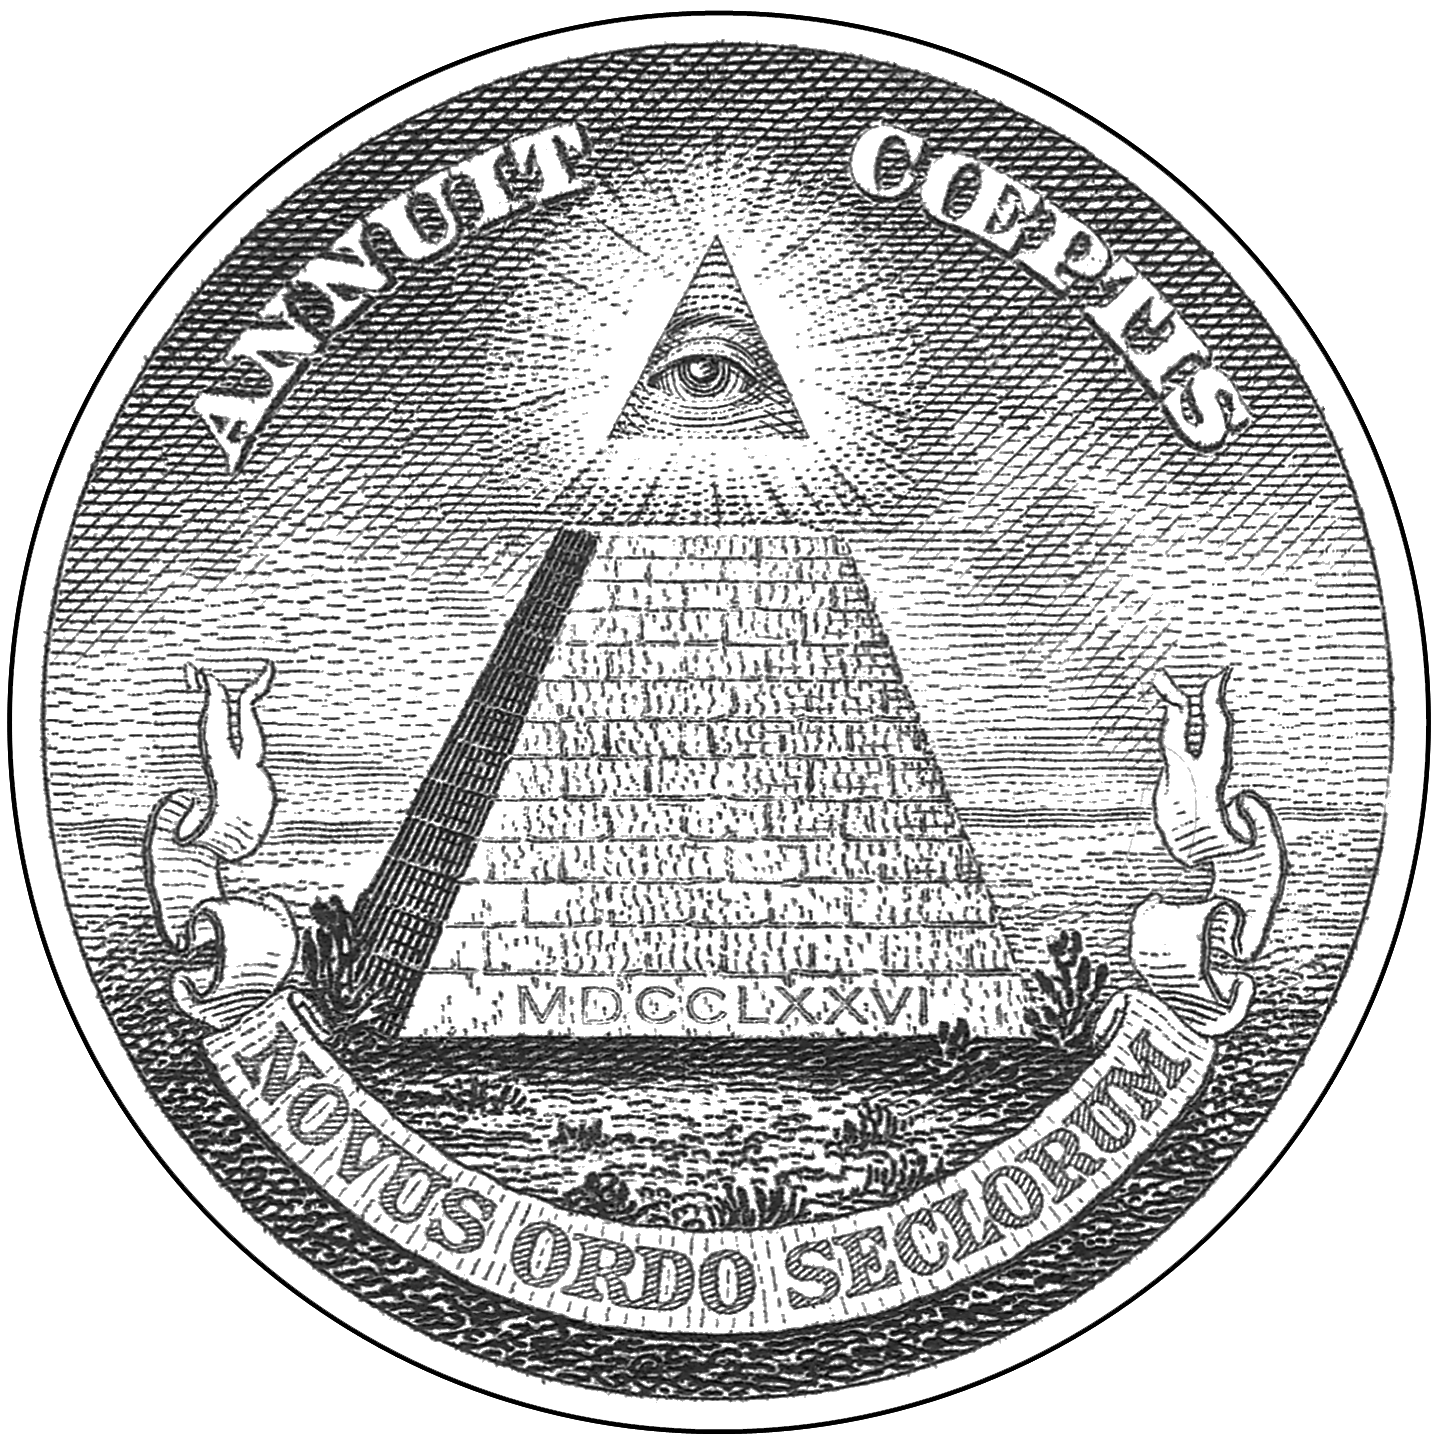 The reverse of the Great Seal of the United States Source: Wikimedia commons